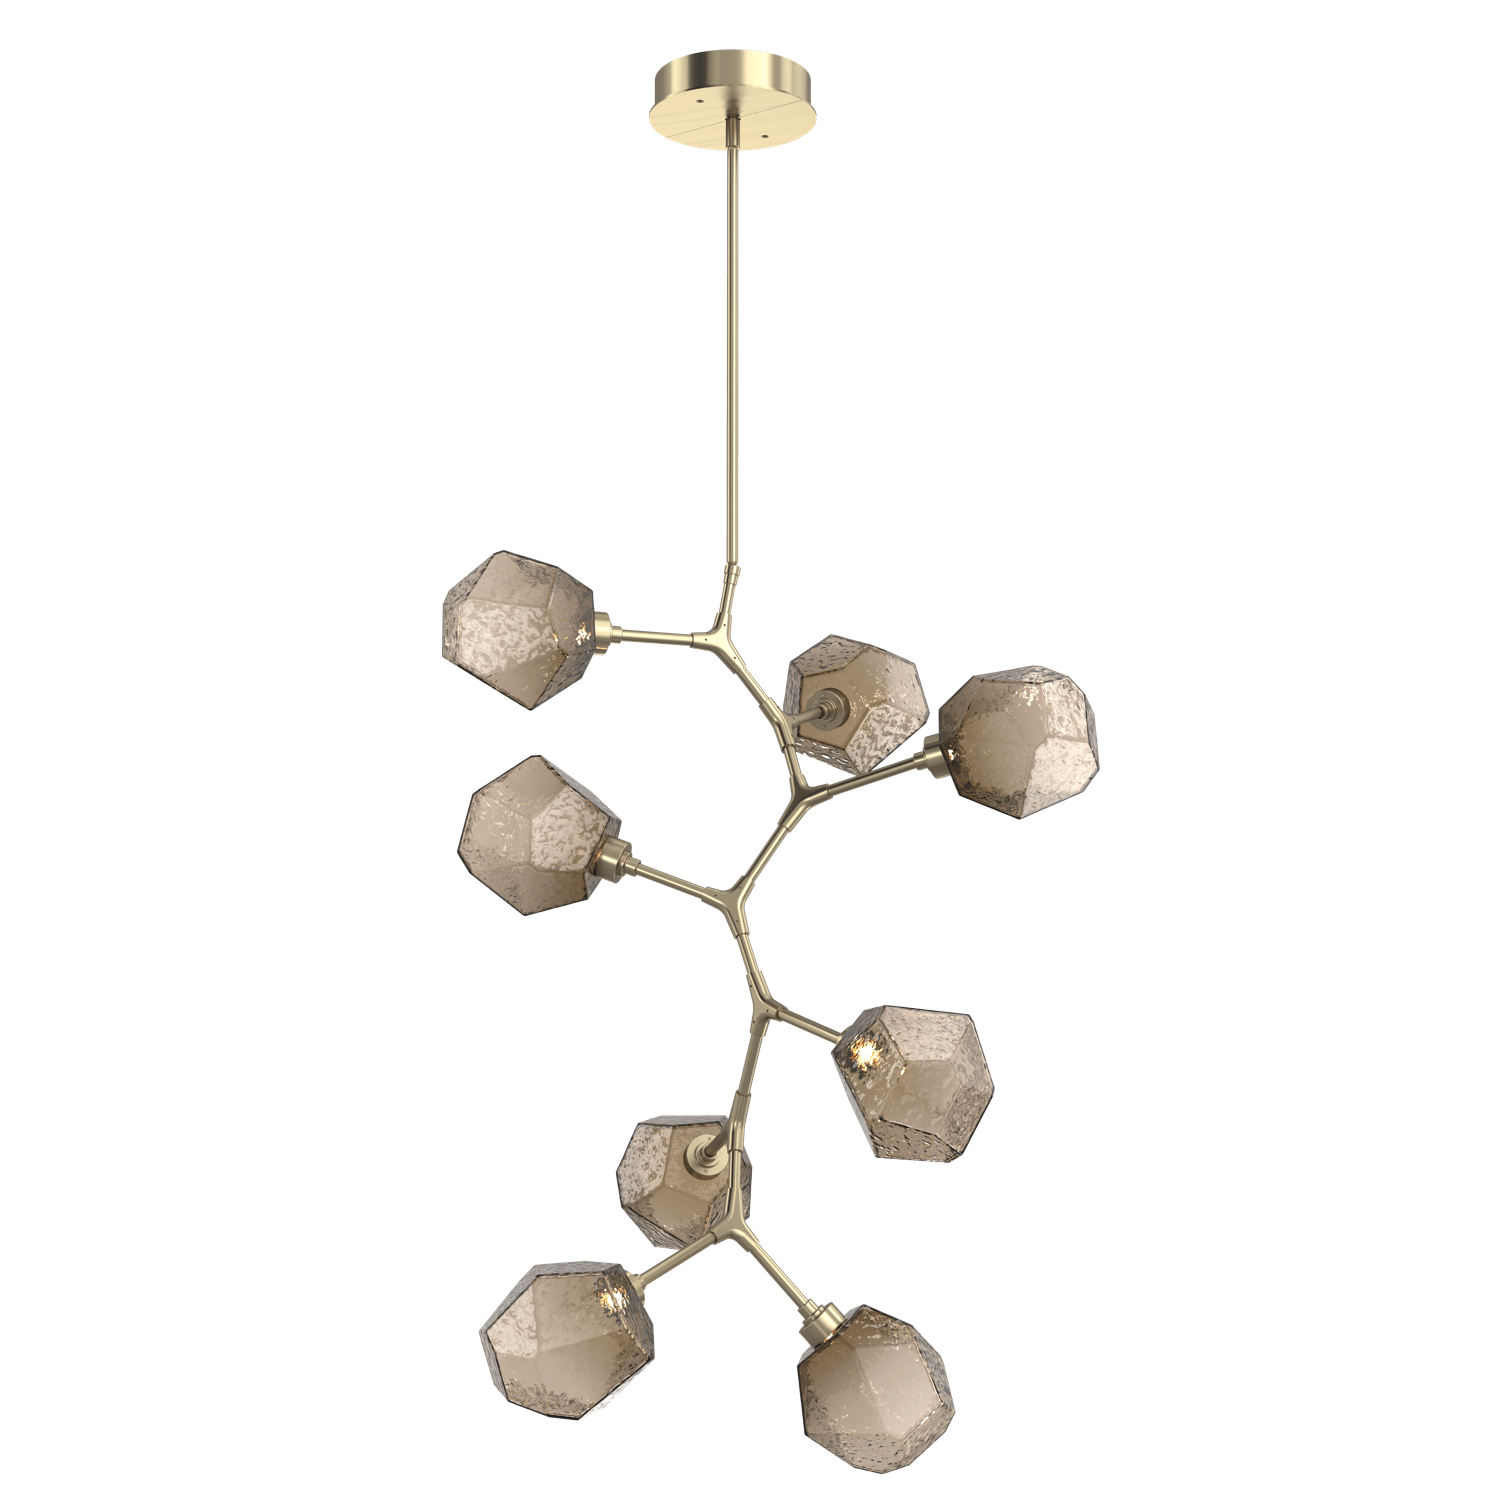 CHB0039-VB-HB-B-Hammerton-Studio-Gem-8-light-modern-vine-chandelier-with-heritage-brass-finish-and-bronze-blown-glass-shades-and-LED-lamping